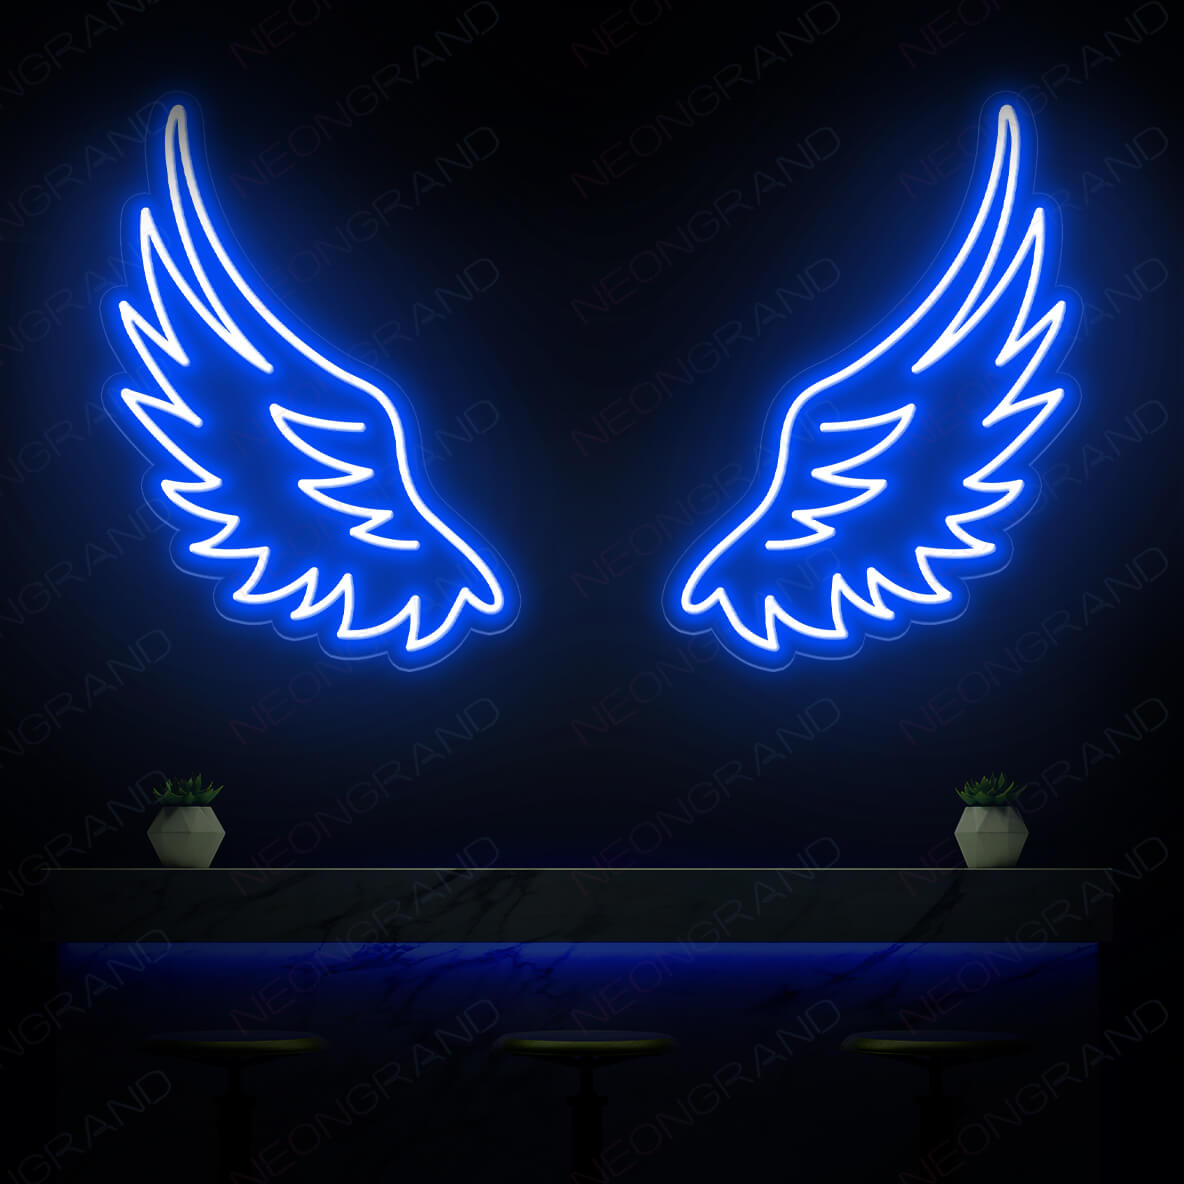 Angel Wings Neon Sign Led Light Bar Neon Signs Blue